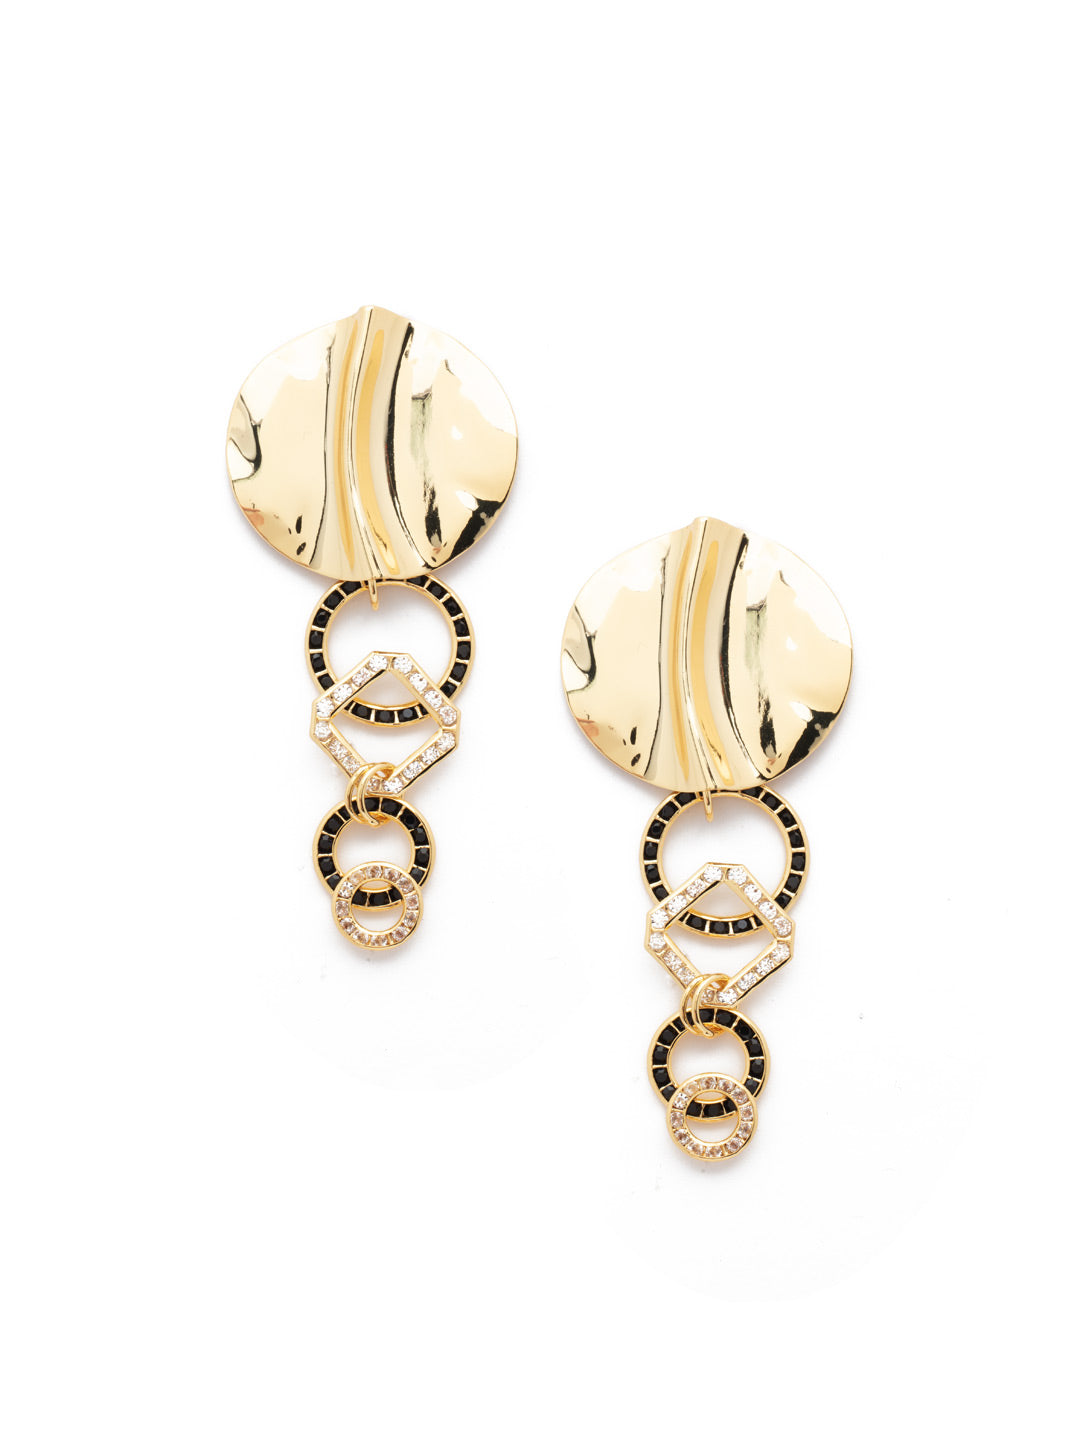 Tanya Statement Earrings - 4EEV71BGMMO - <p>The Tanya Earrings were designed to make a statement; a mix of textures, shapes, and crystals blend beautifully on a post stud. From Sorrelli's Midnight Moon collection in our Bright Gold-tone finish.</p>